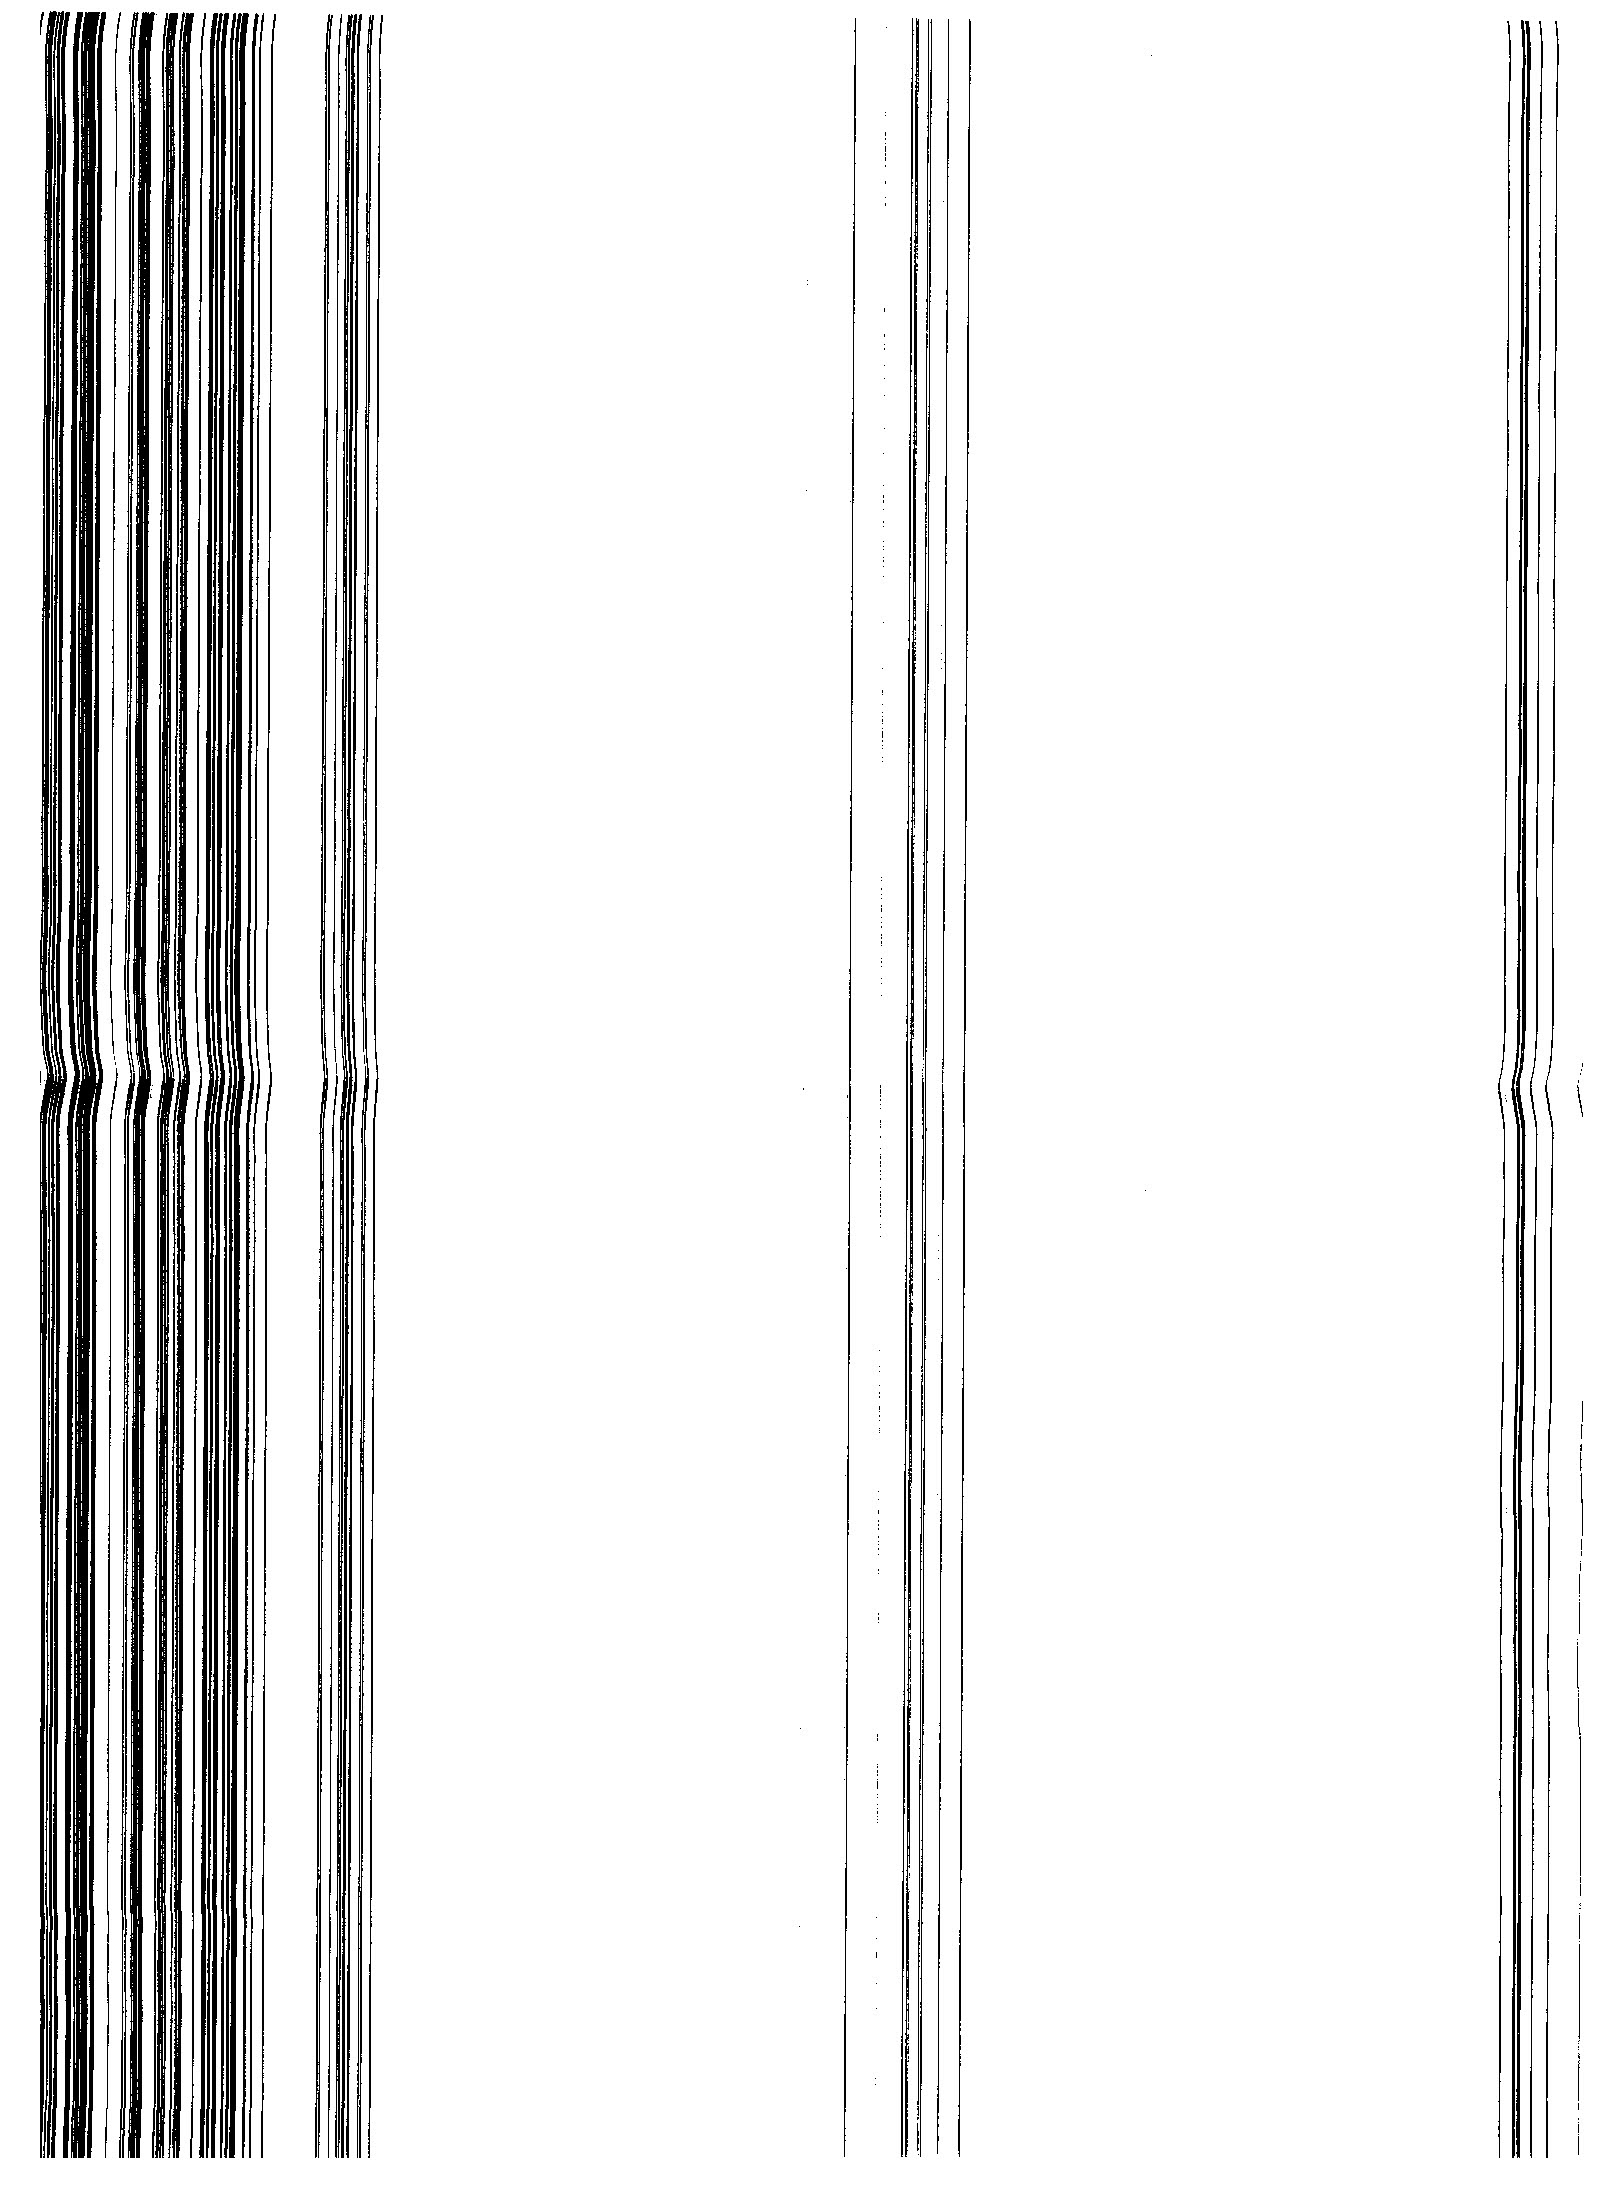 HP Laserjet 1536dnf - vertical lines issue when scanning - HP Support  Community - 2934177